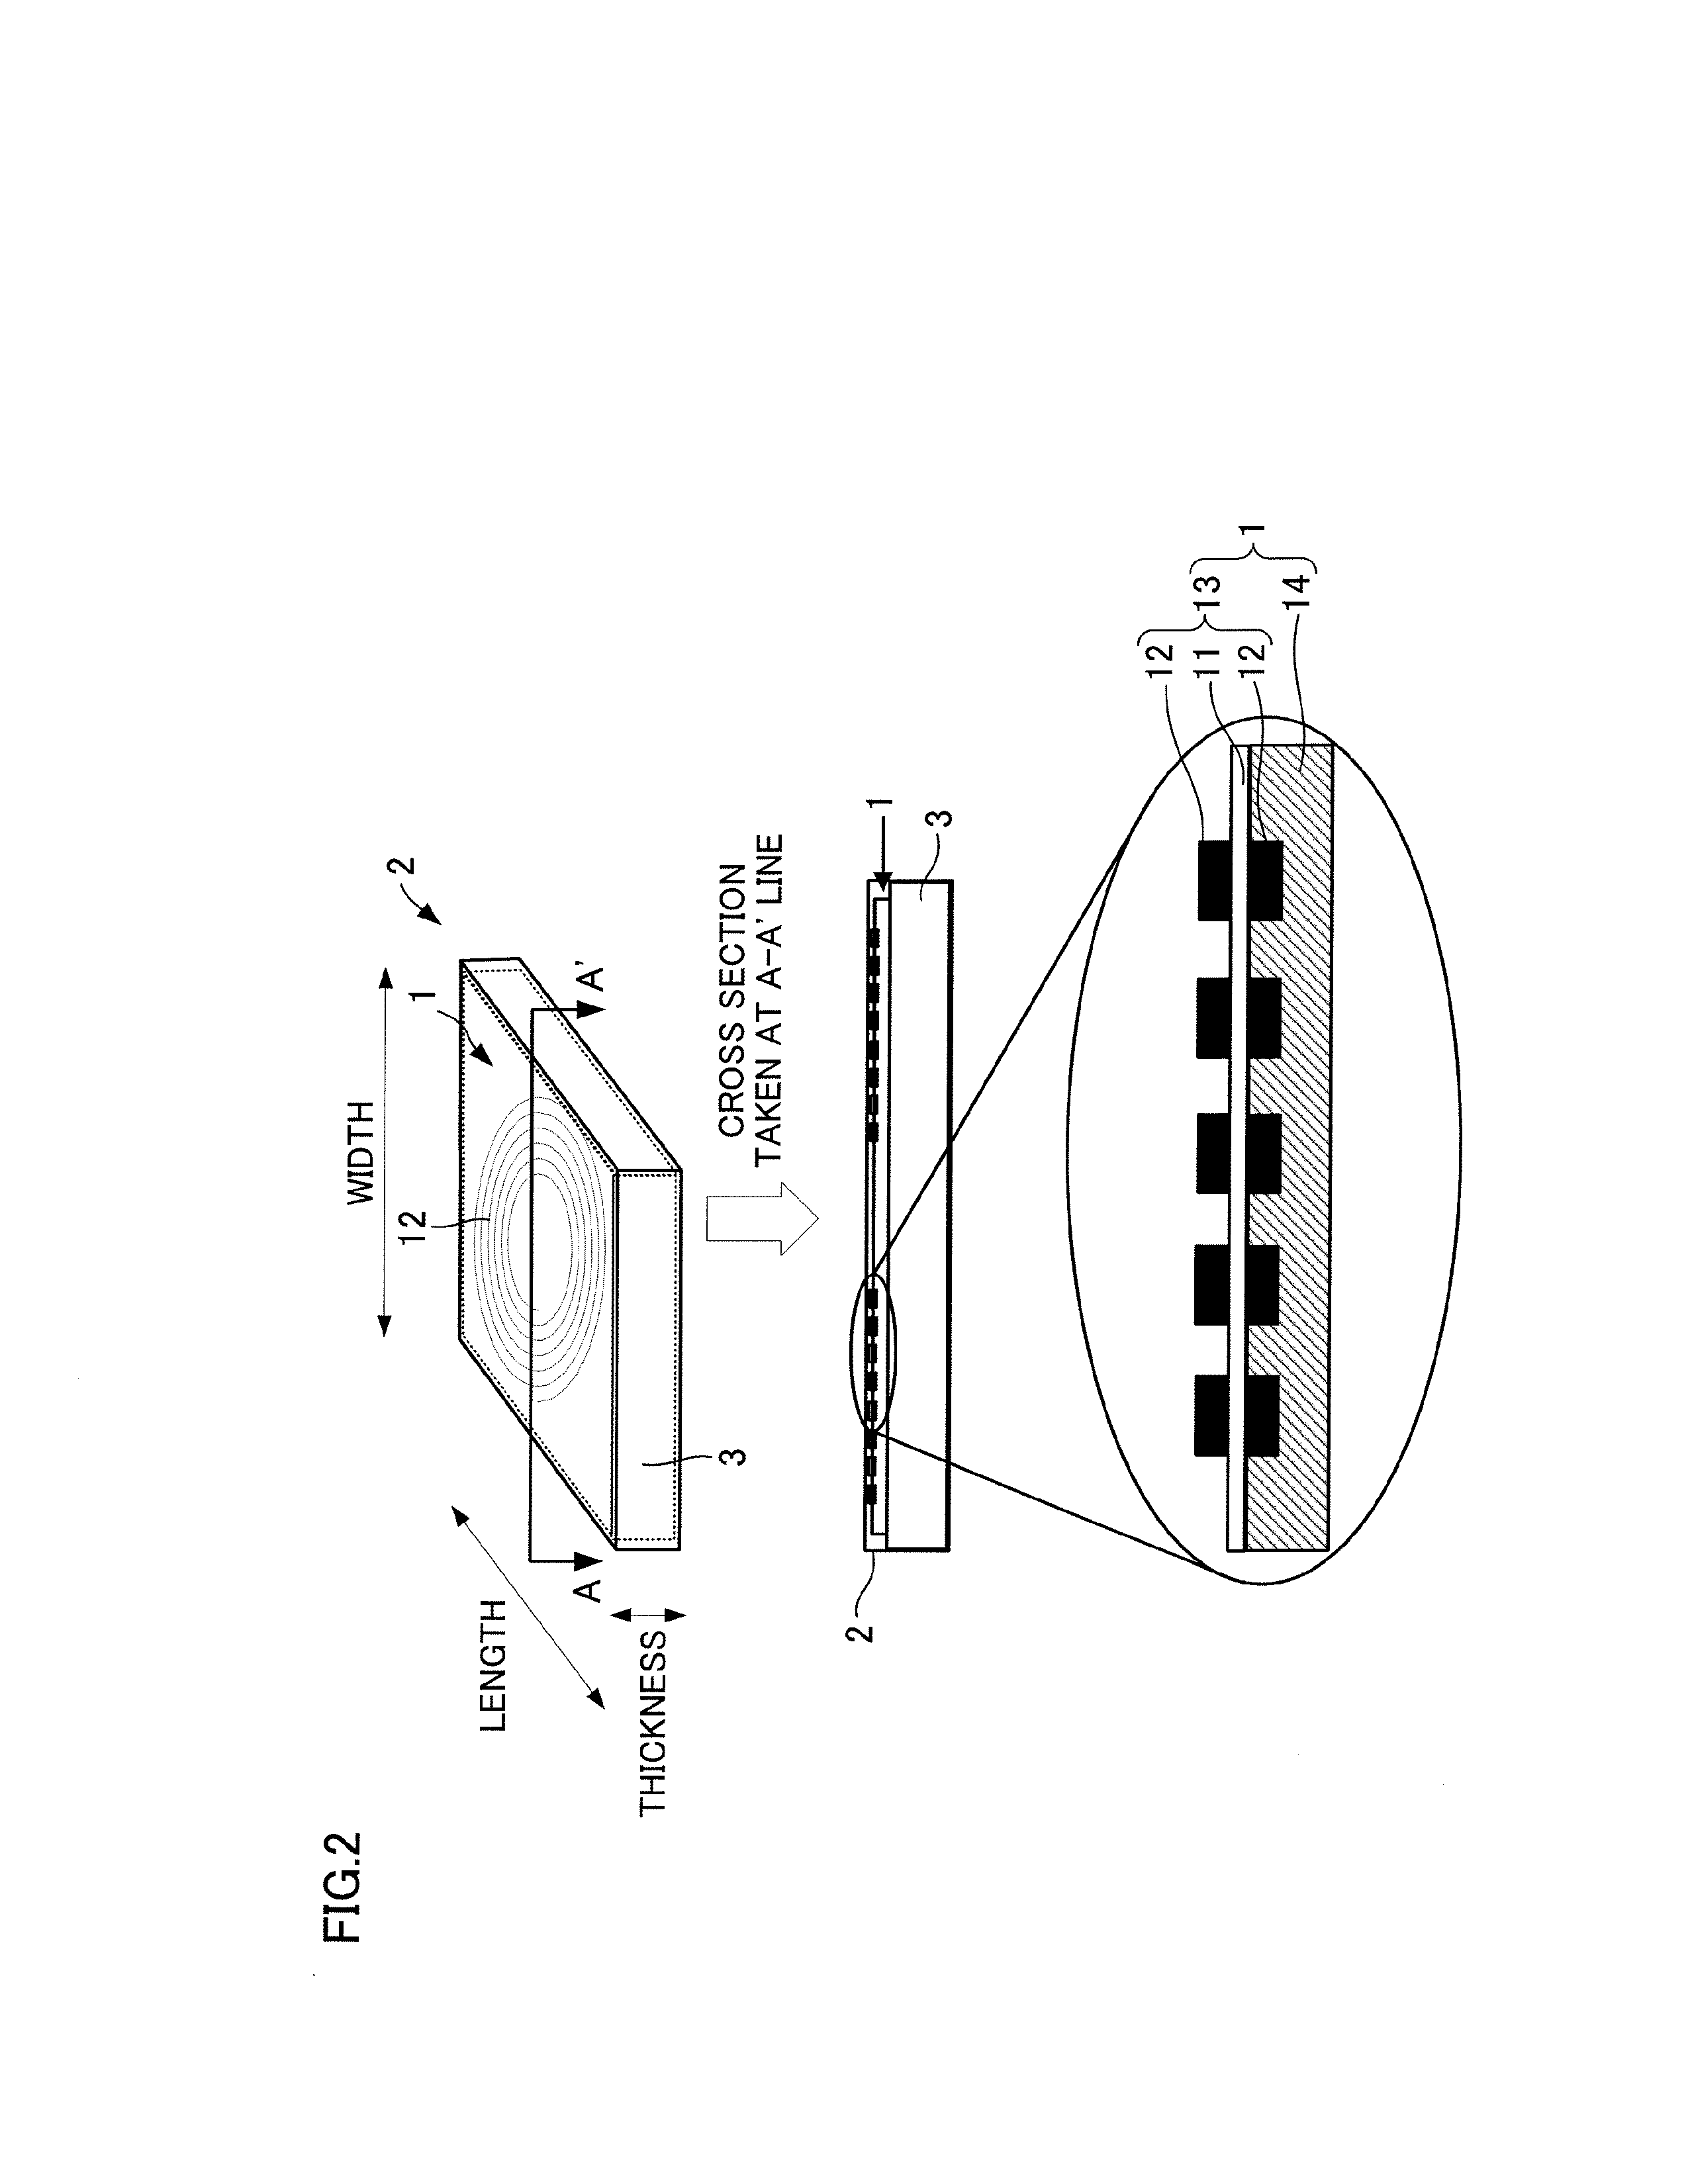 Mobile terminal power receiving module utilizing wireless power transmission and mobile terminal rechargable battery including mobile terminal power receiving module